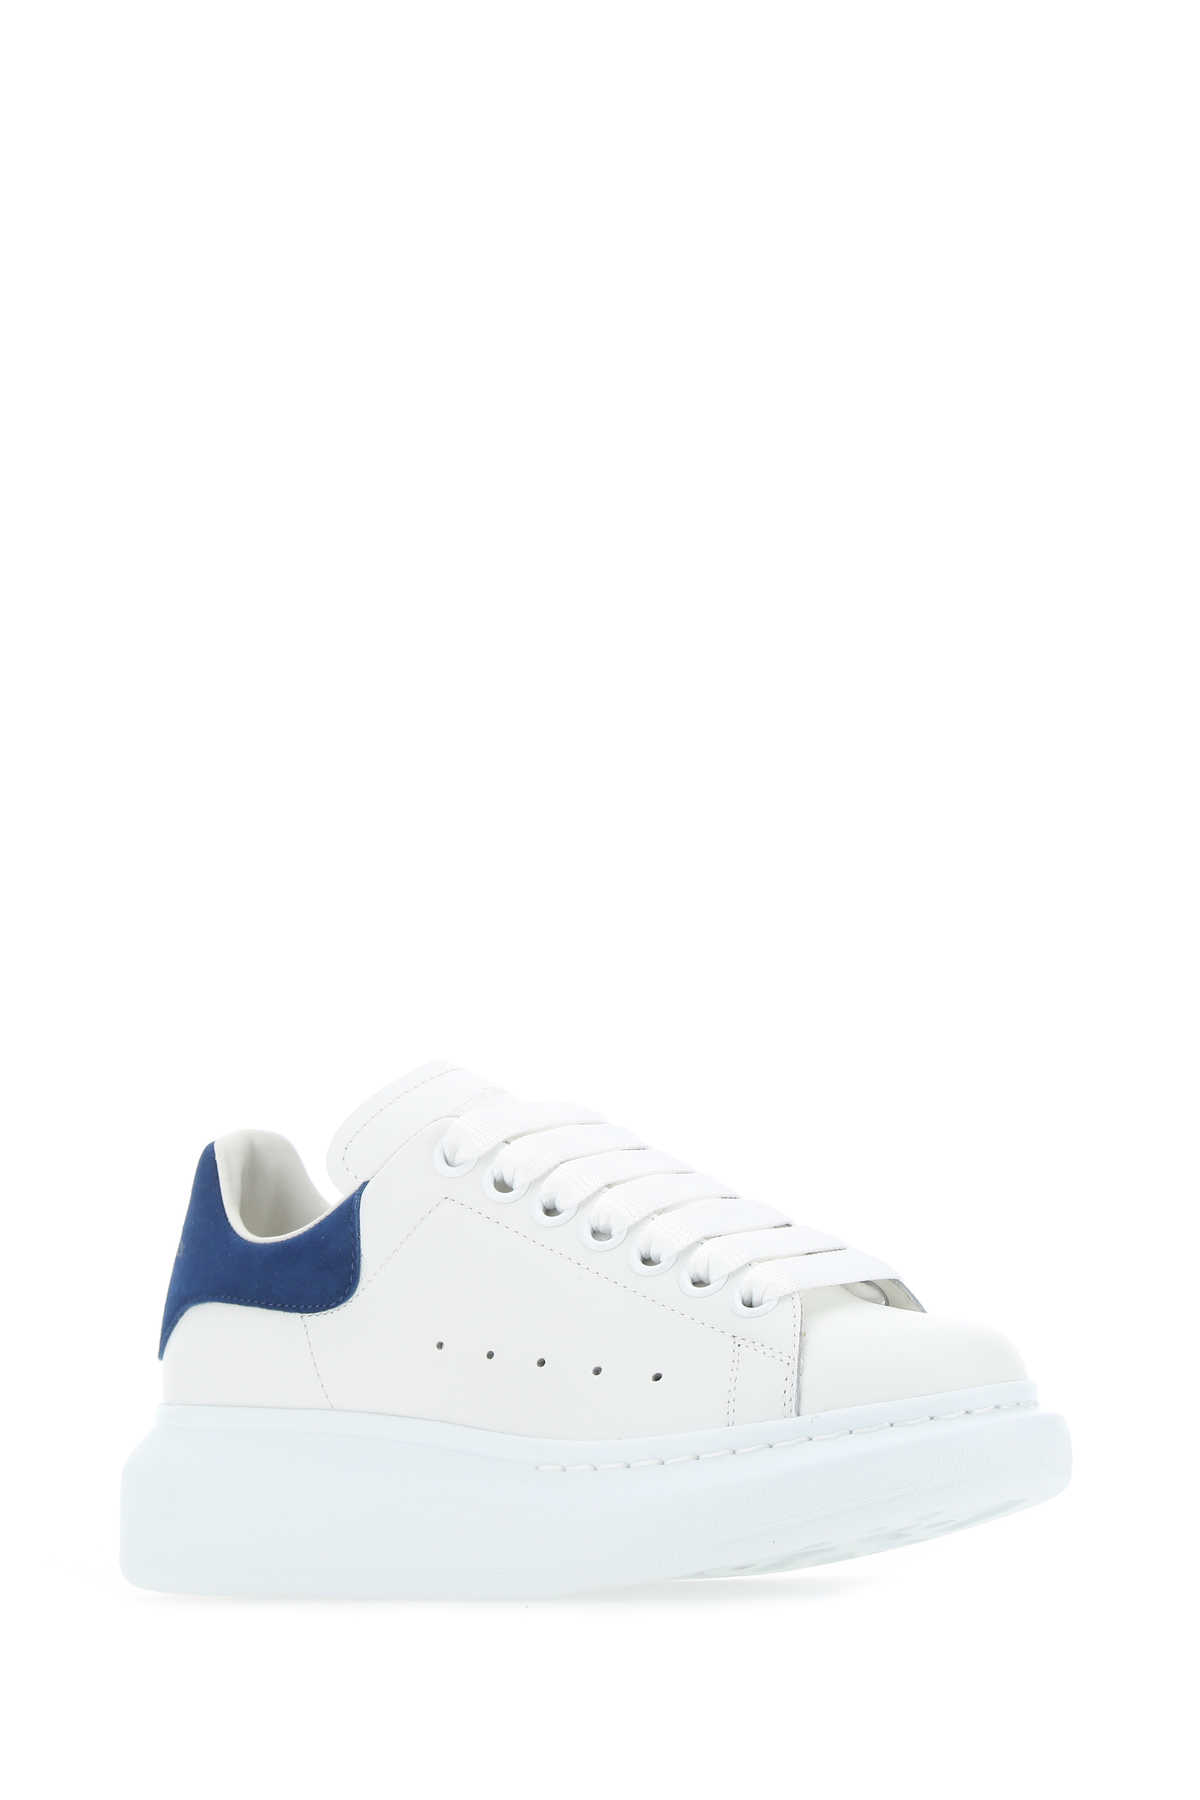 Shop Alexander Mcqueen White Leather Sneakers With Blue Suede Heel In 9086